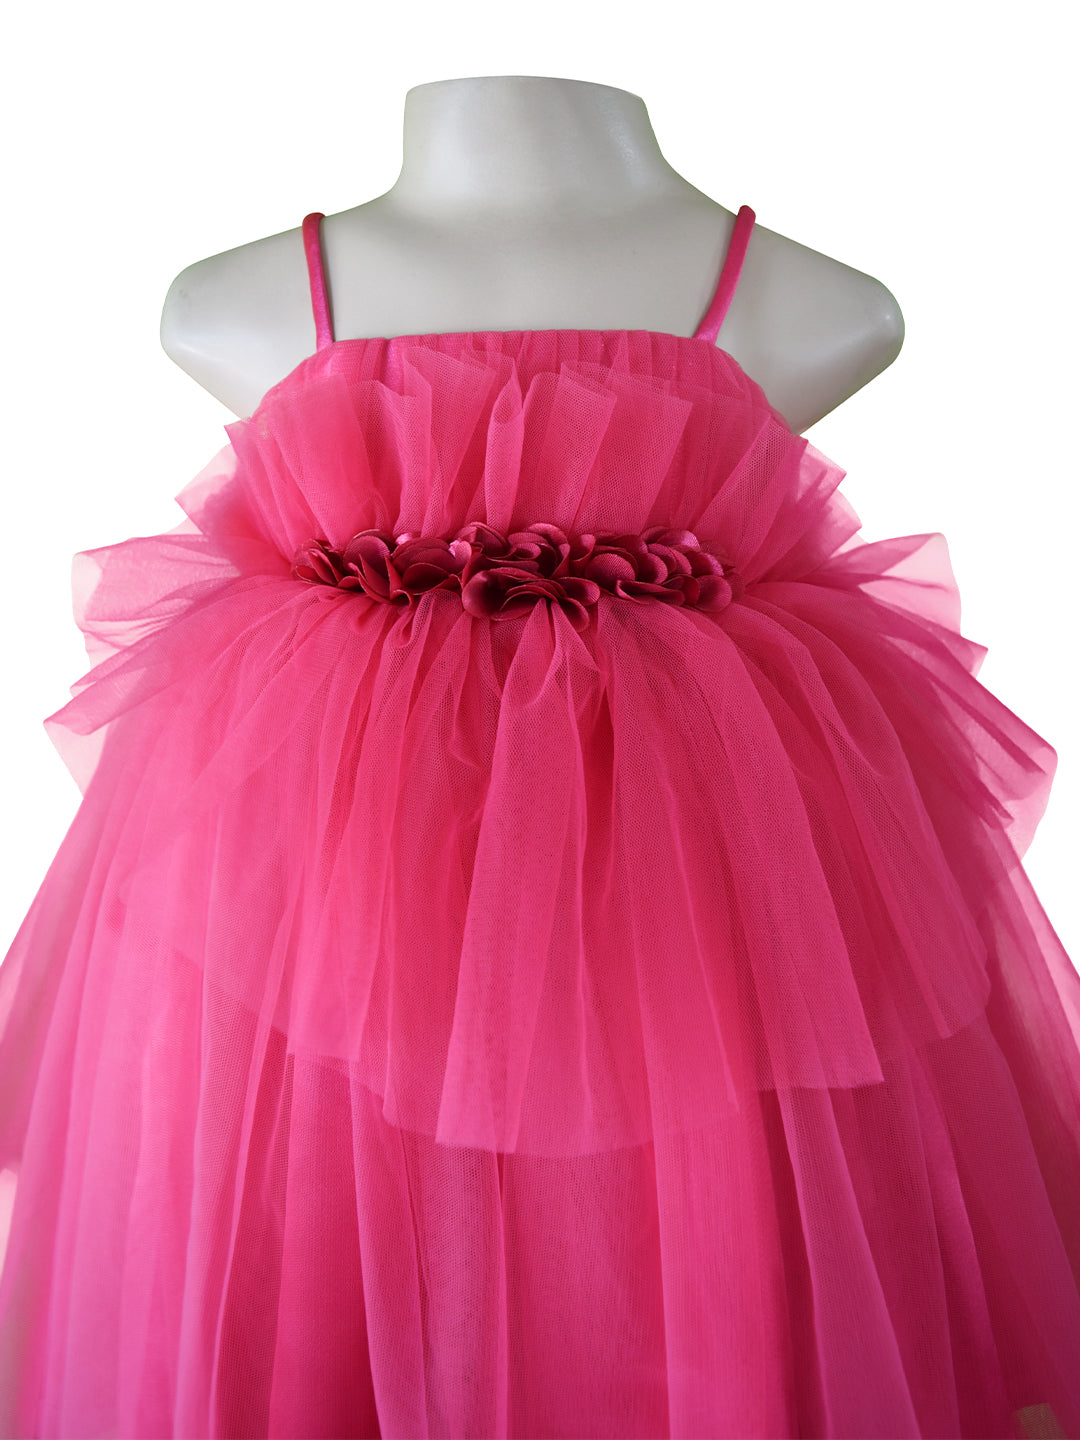 Satin party frock for girls | Frocks for girls, Party frocks, Girl outfits